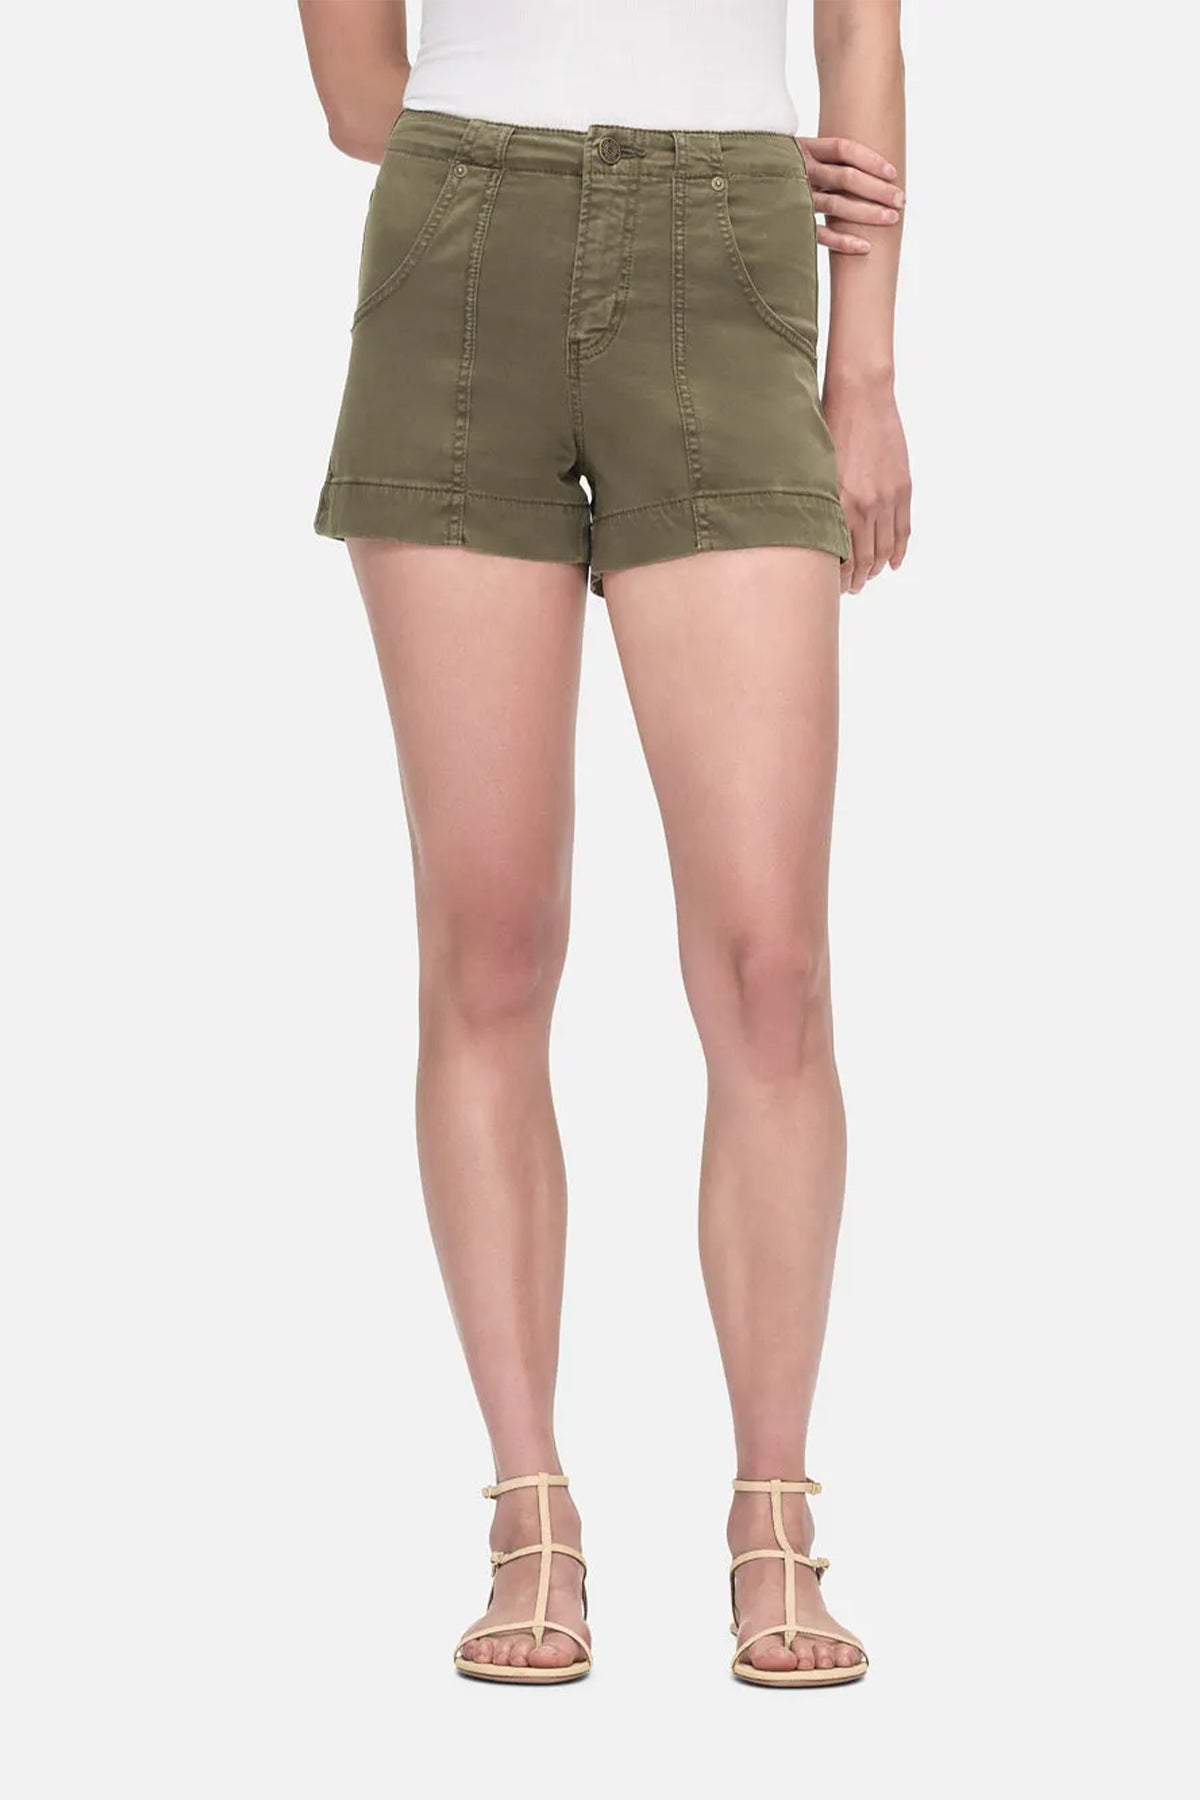 Clean Utility Short in Washed Winter Moss - shop-olivia.com